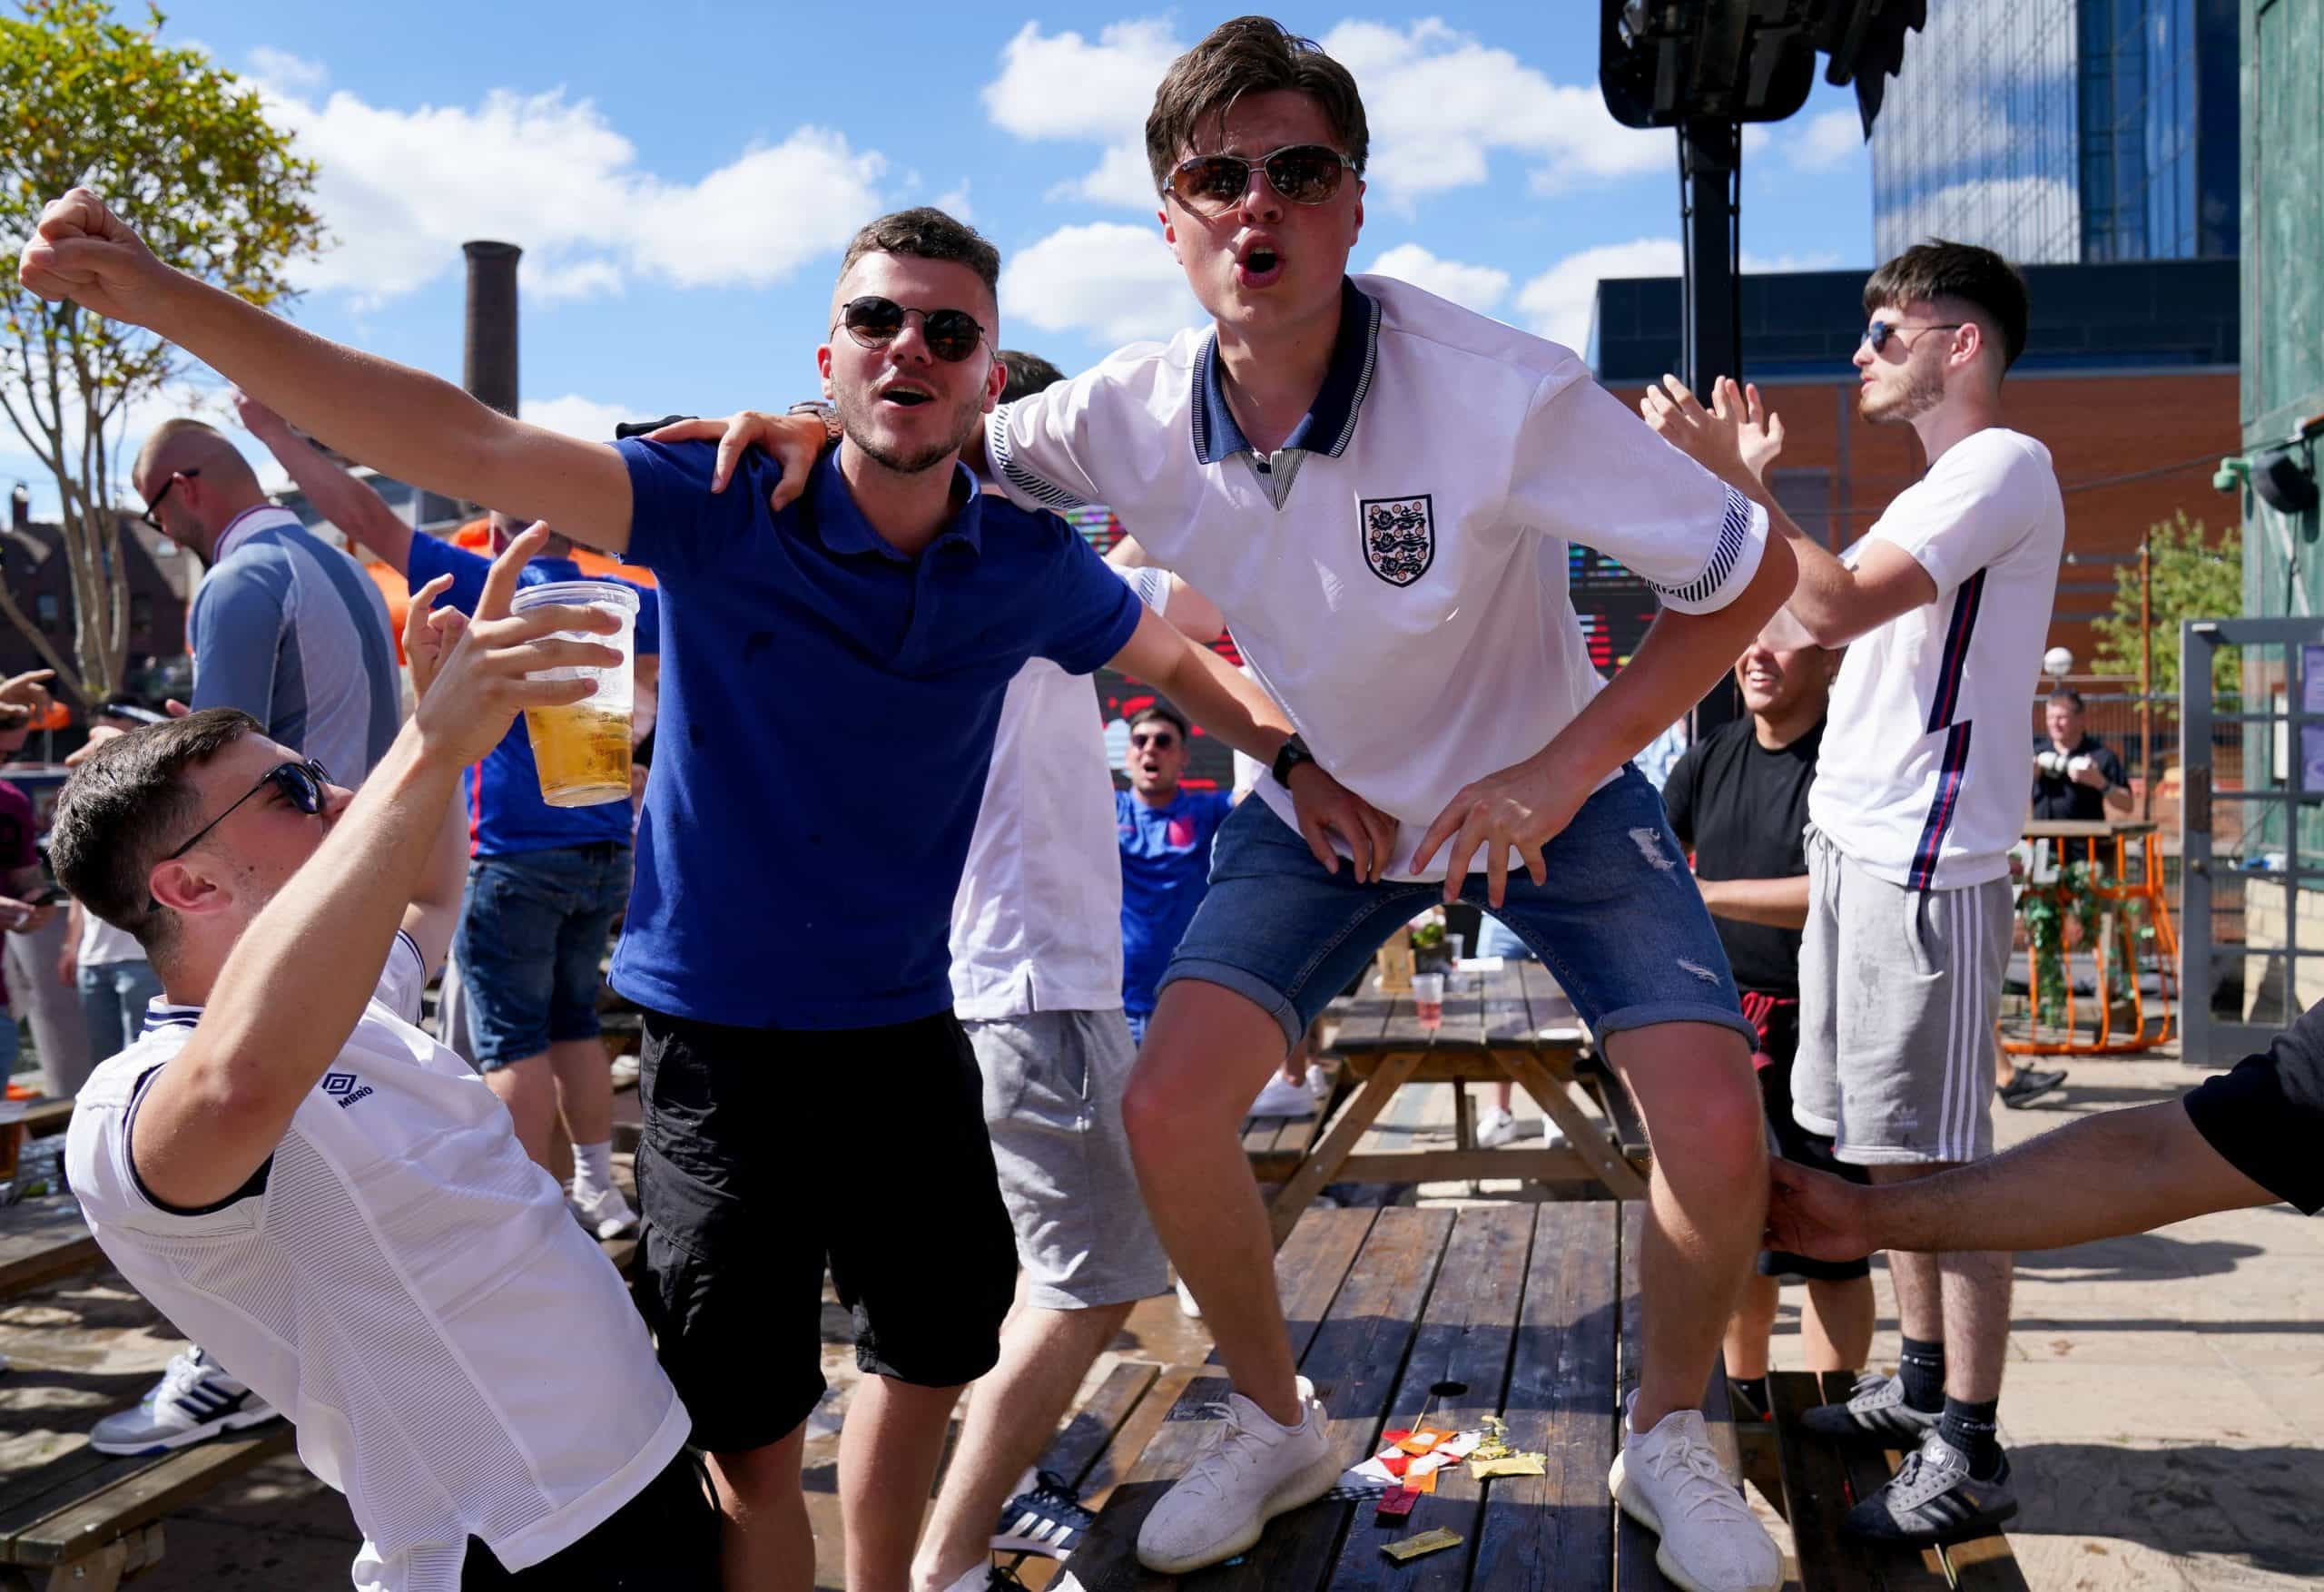 England and Scotland fans will buy 3.4 million pints during Euros clash